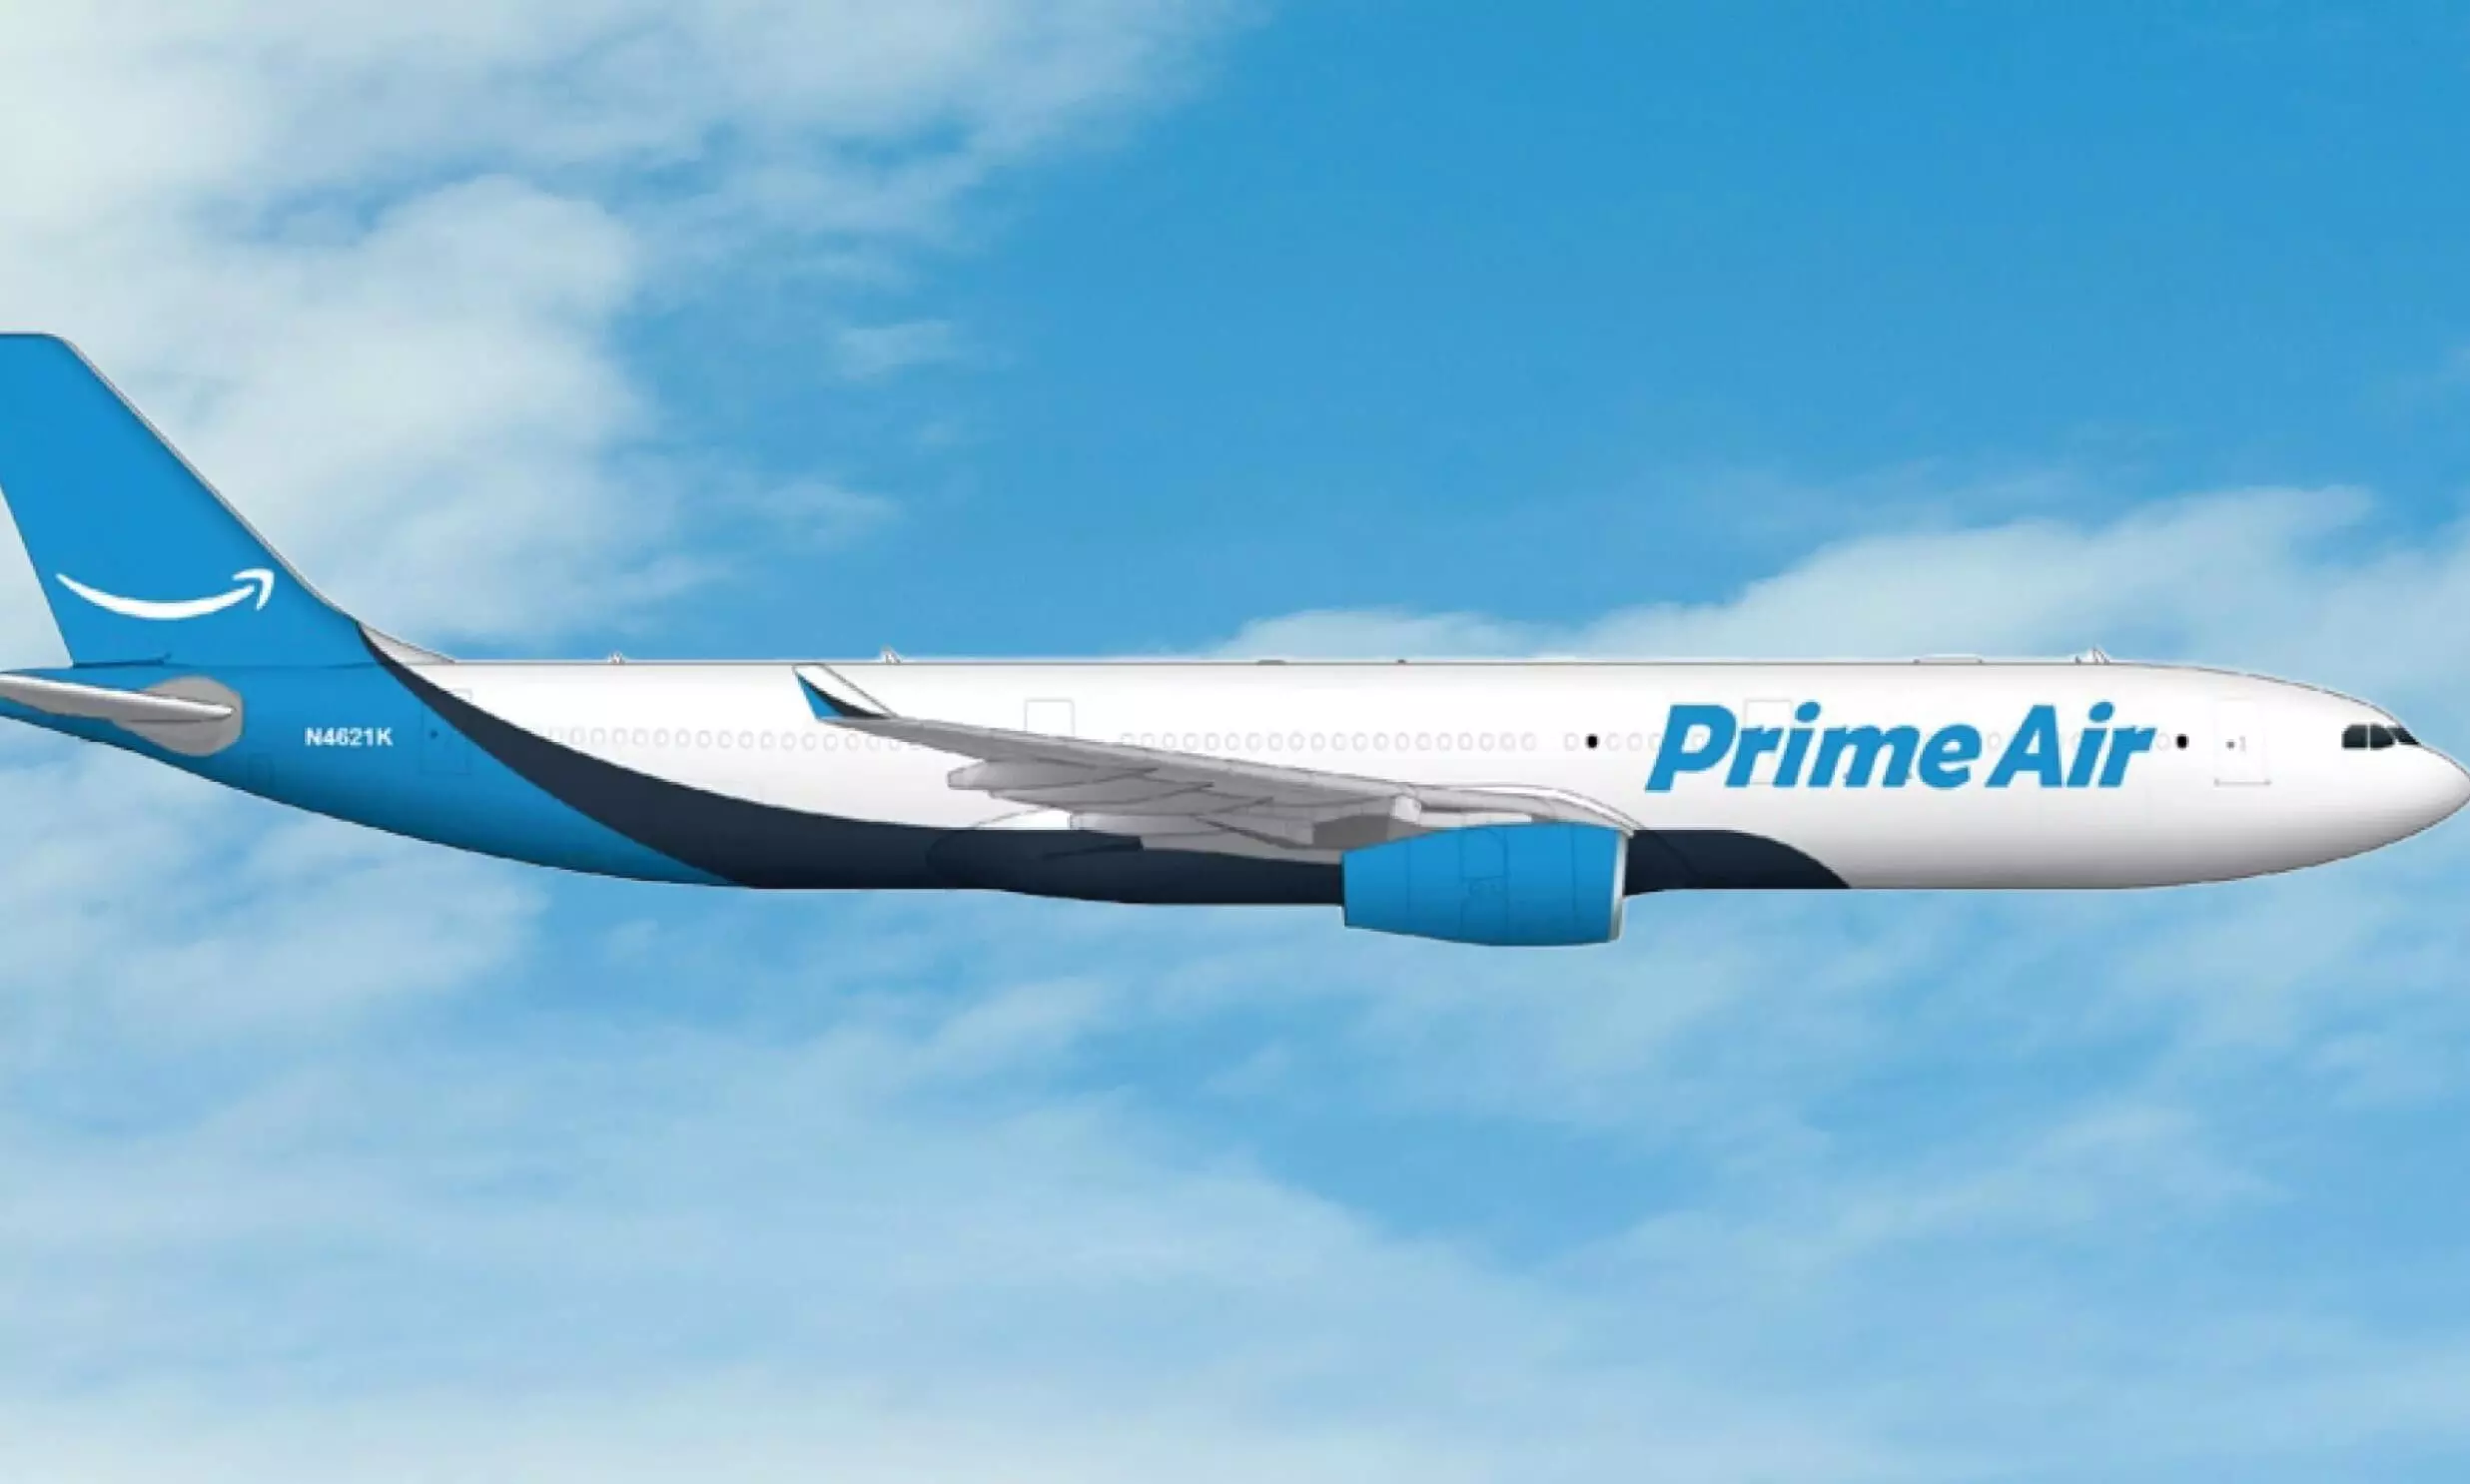 Amazon Air gets its first Airbus A330-300 freighter